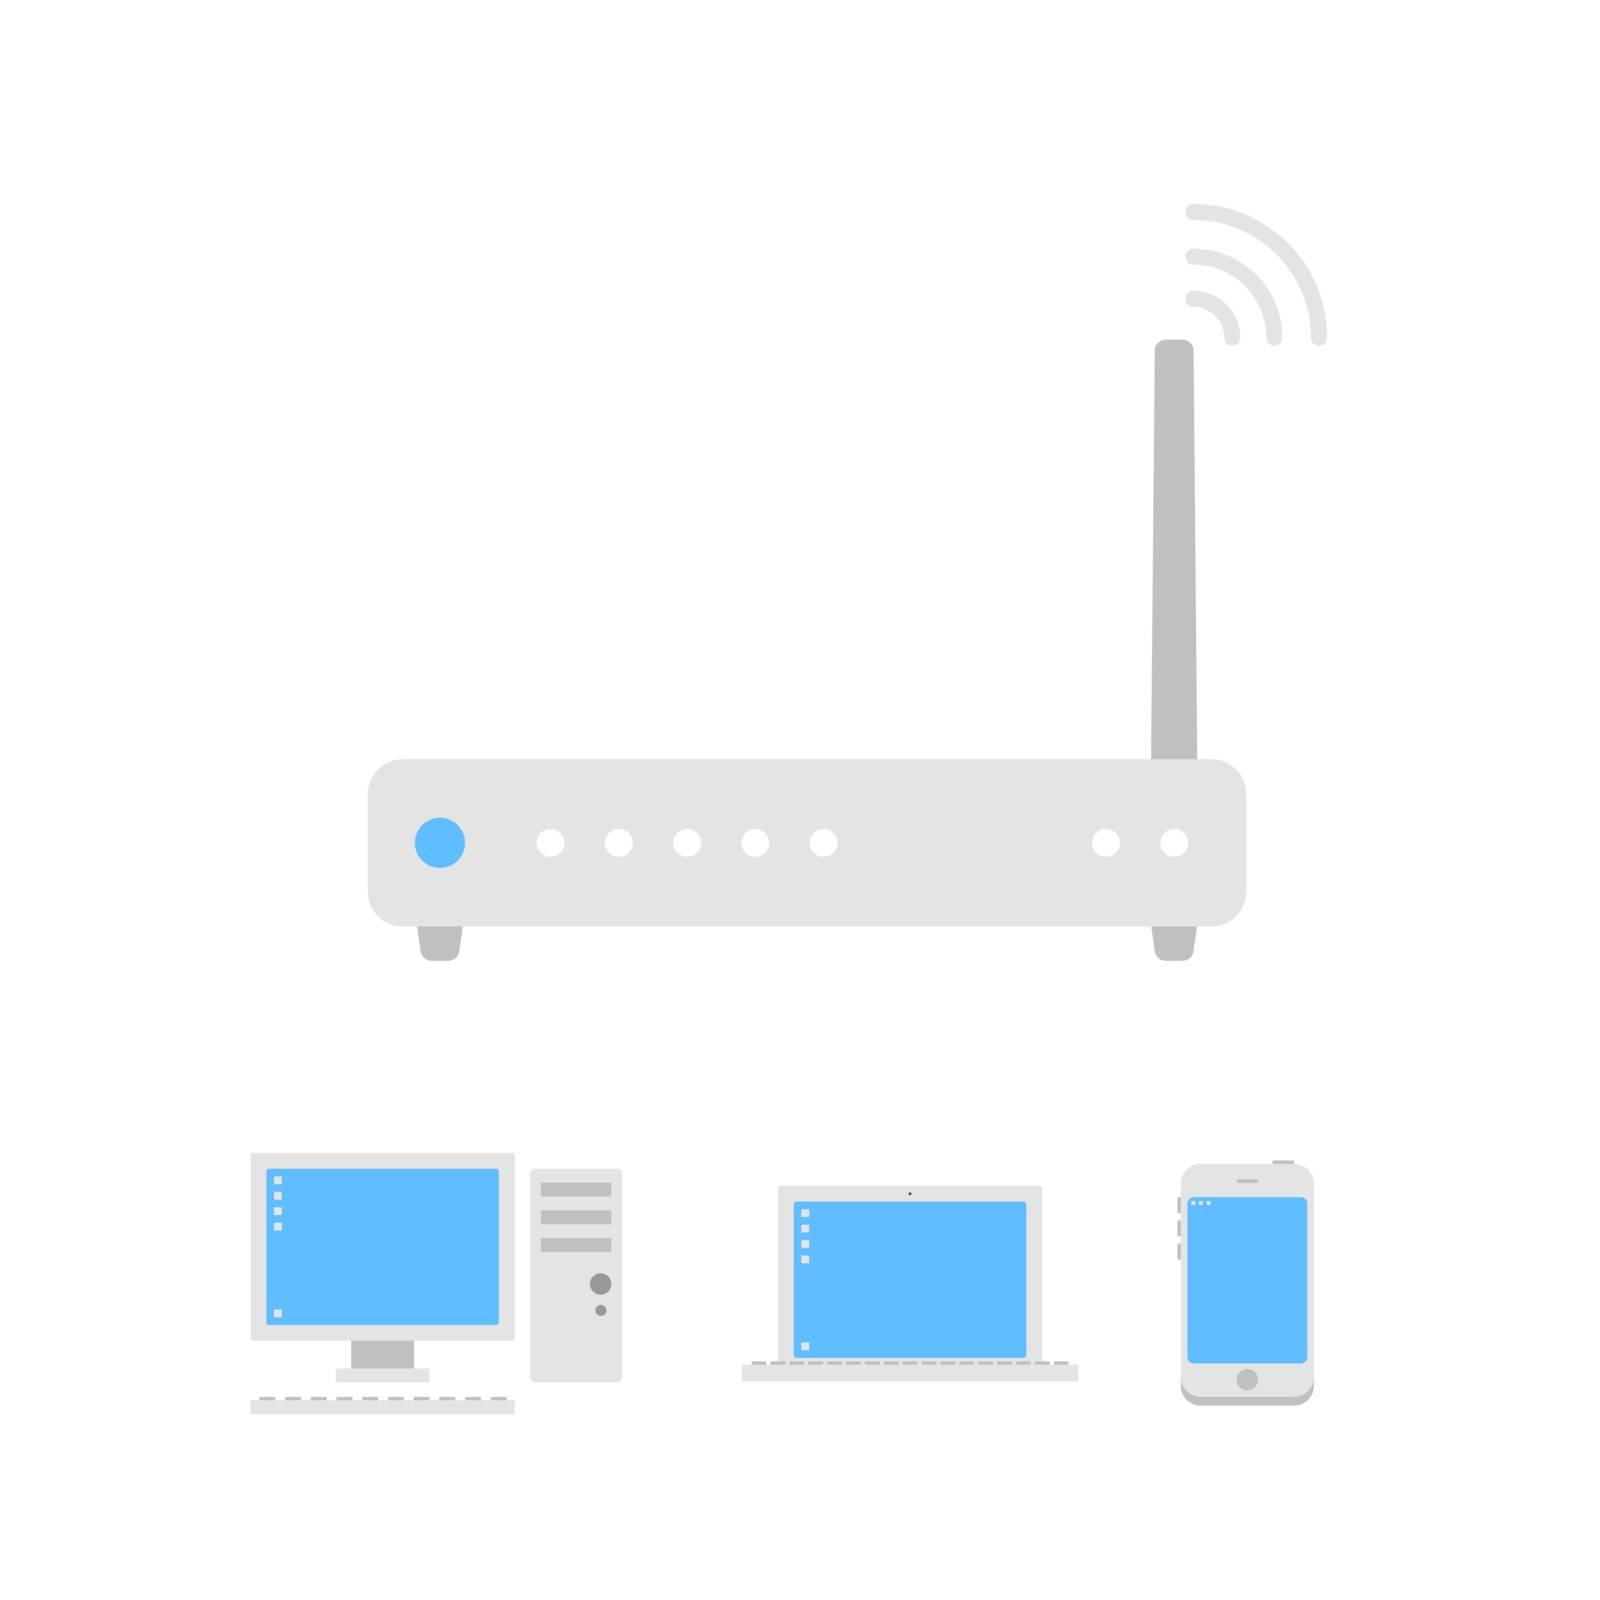 Wi-fi router icon by Whitebarbie